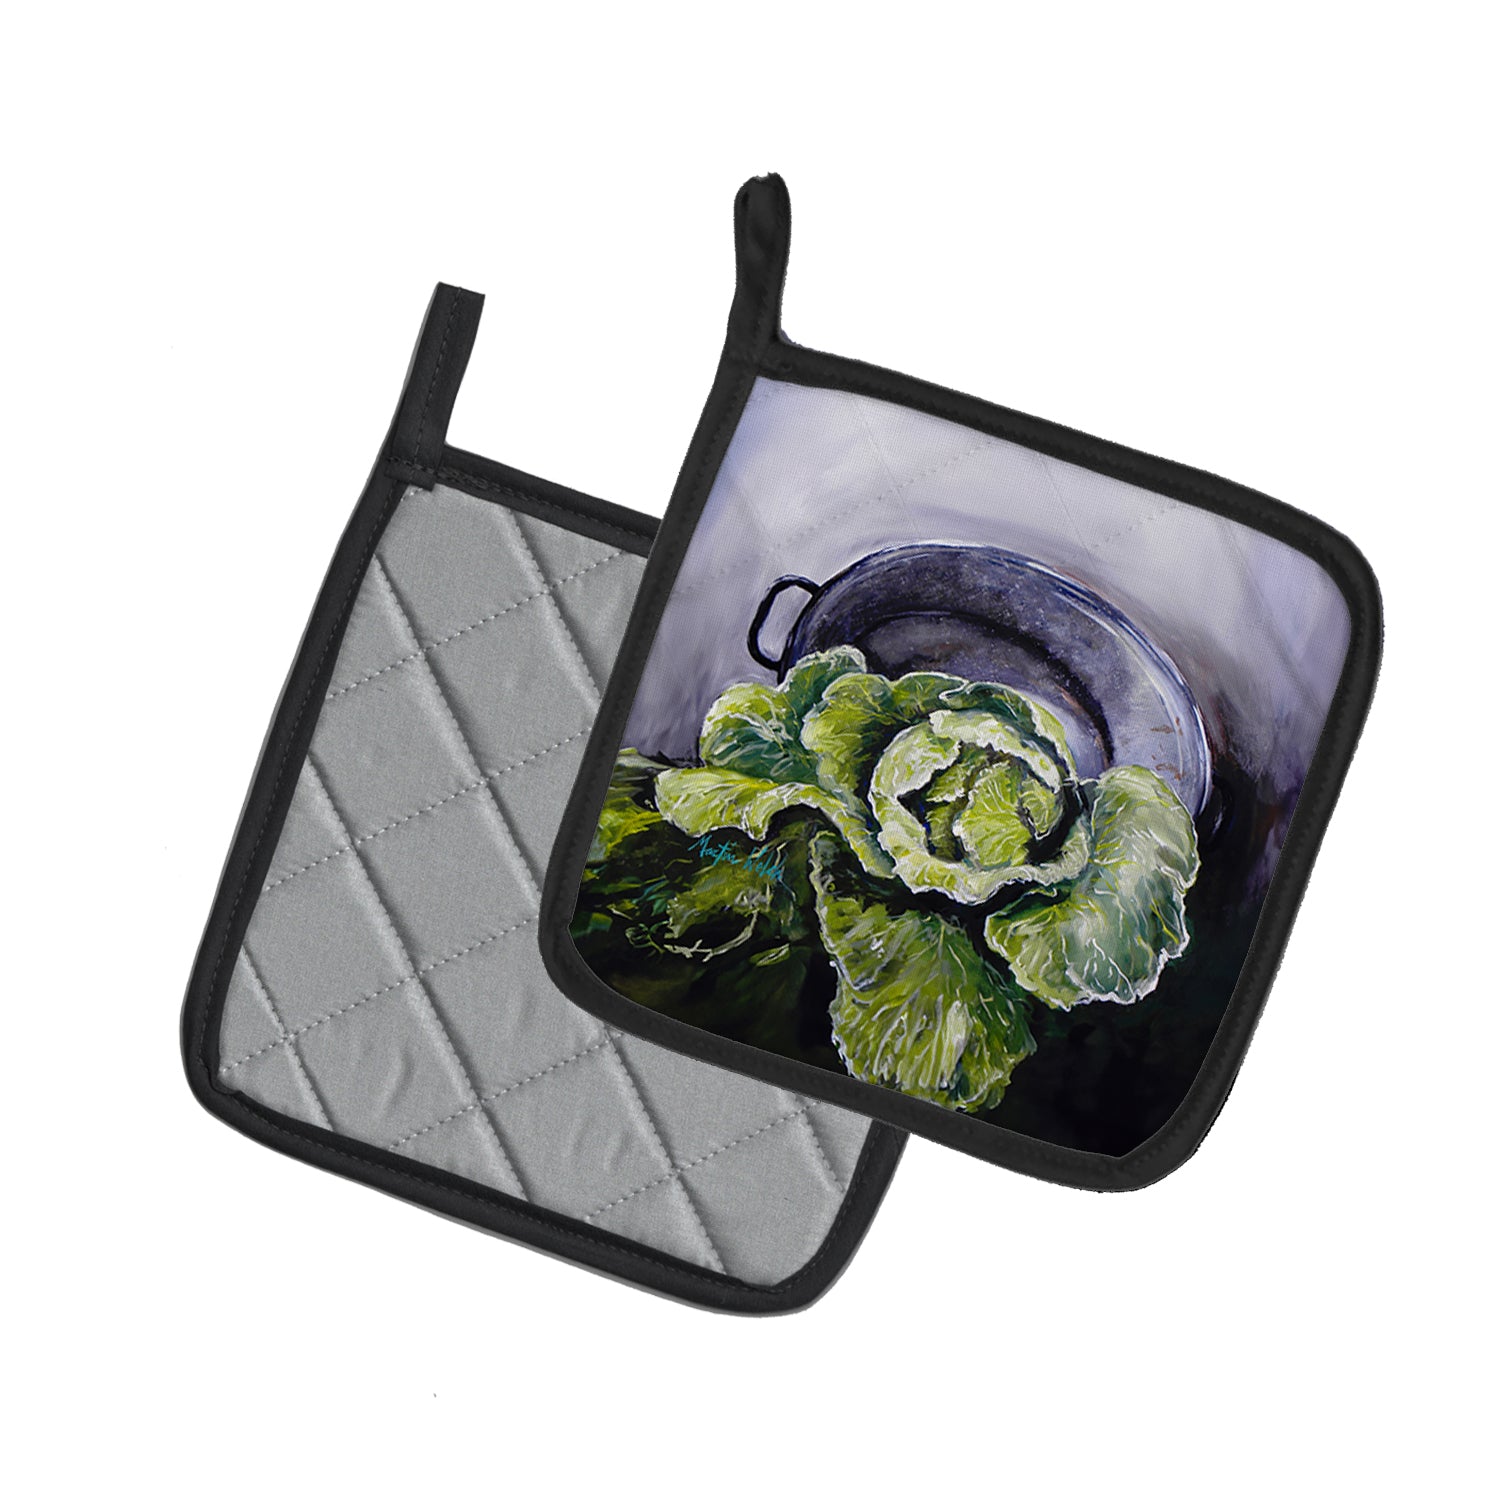 Buy this Home Grown In Plaquemines Parish Cabbage Pair of Pot Holders